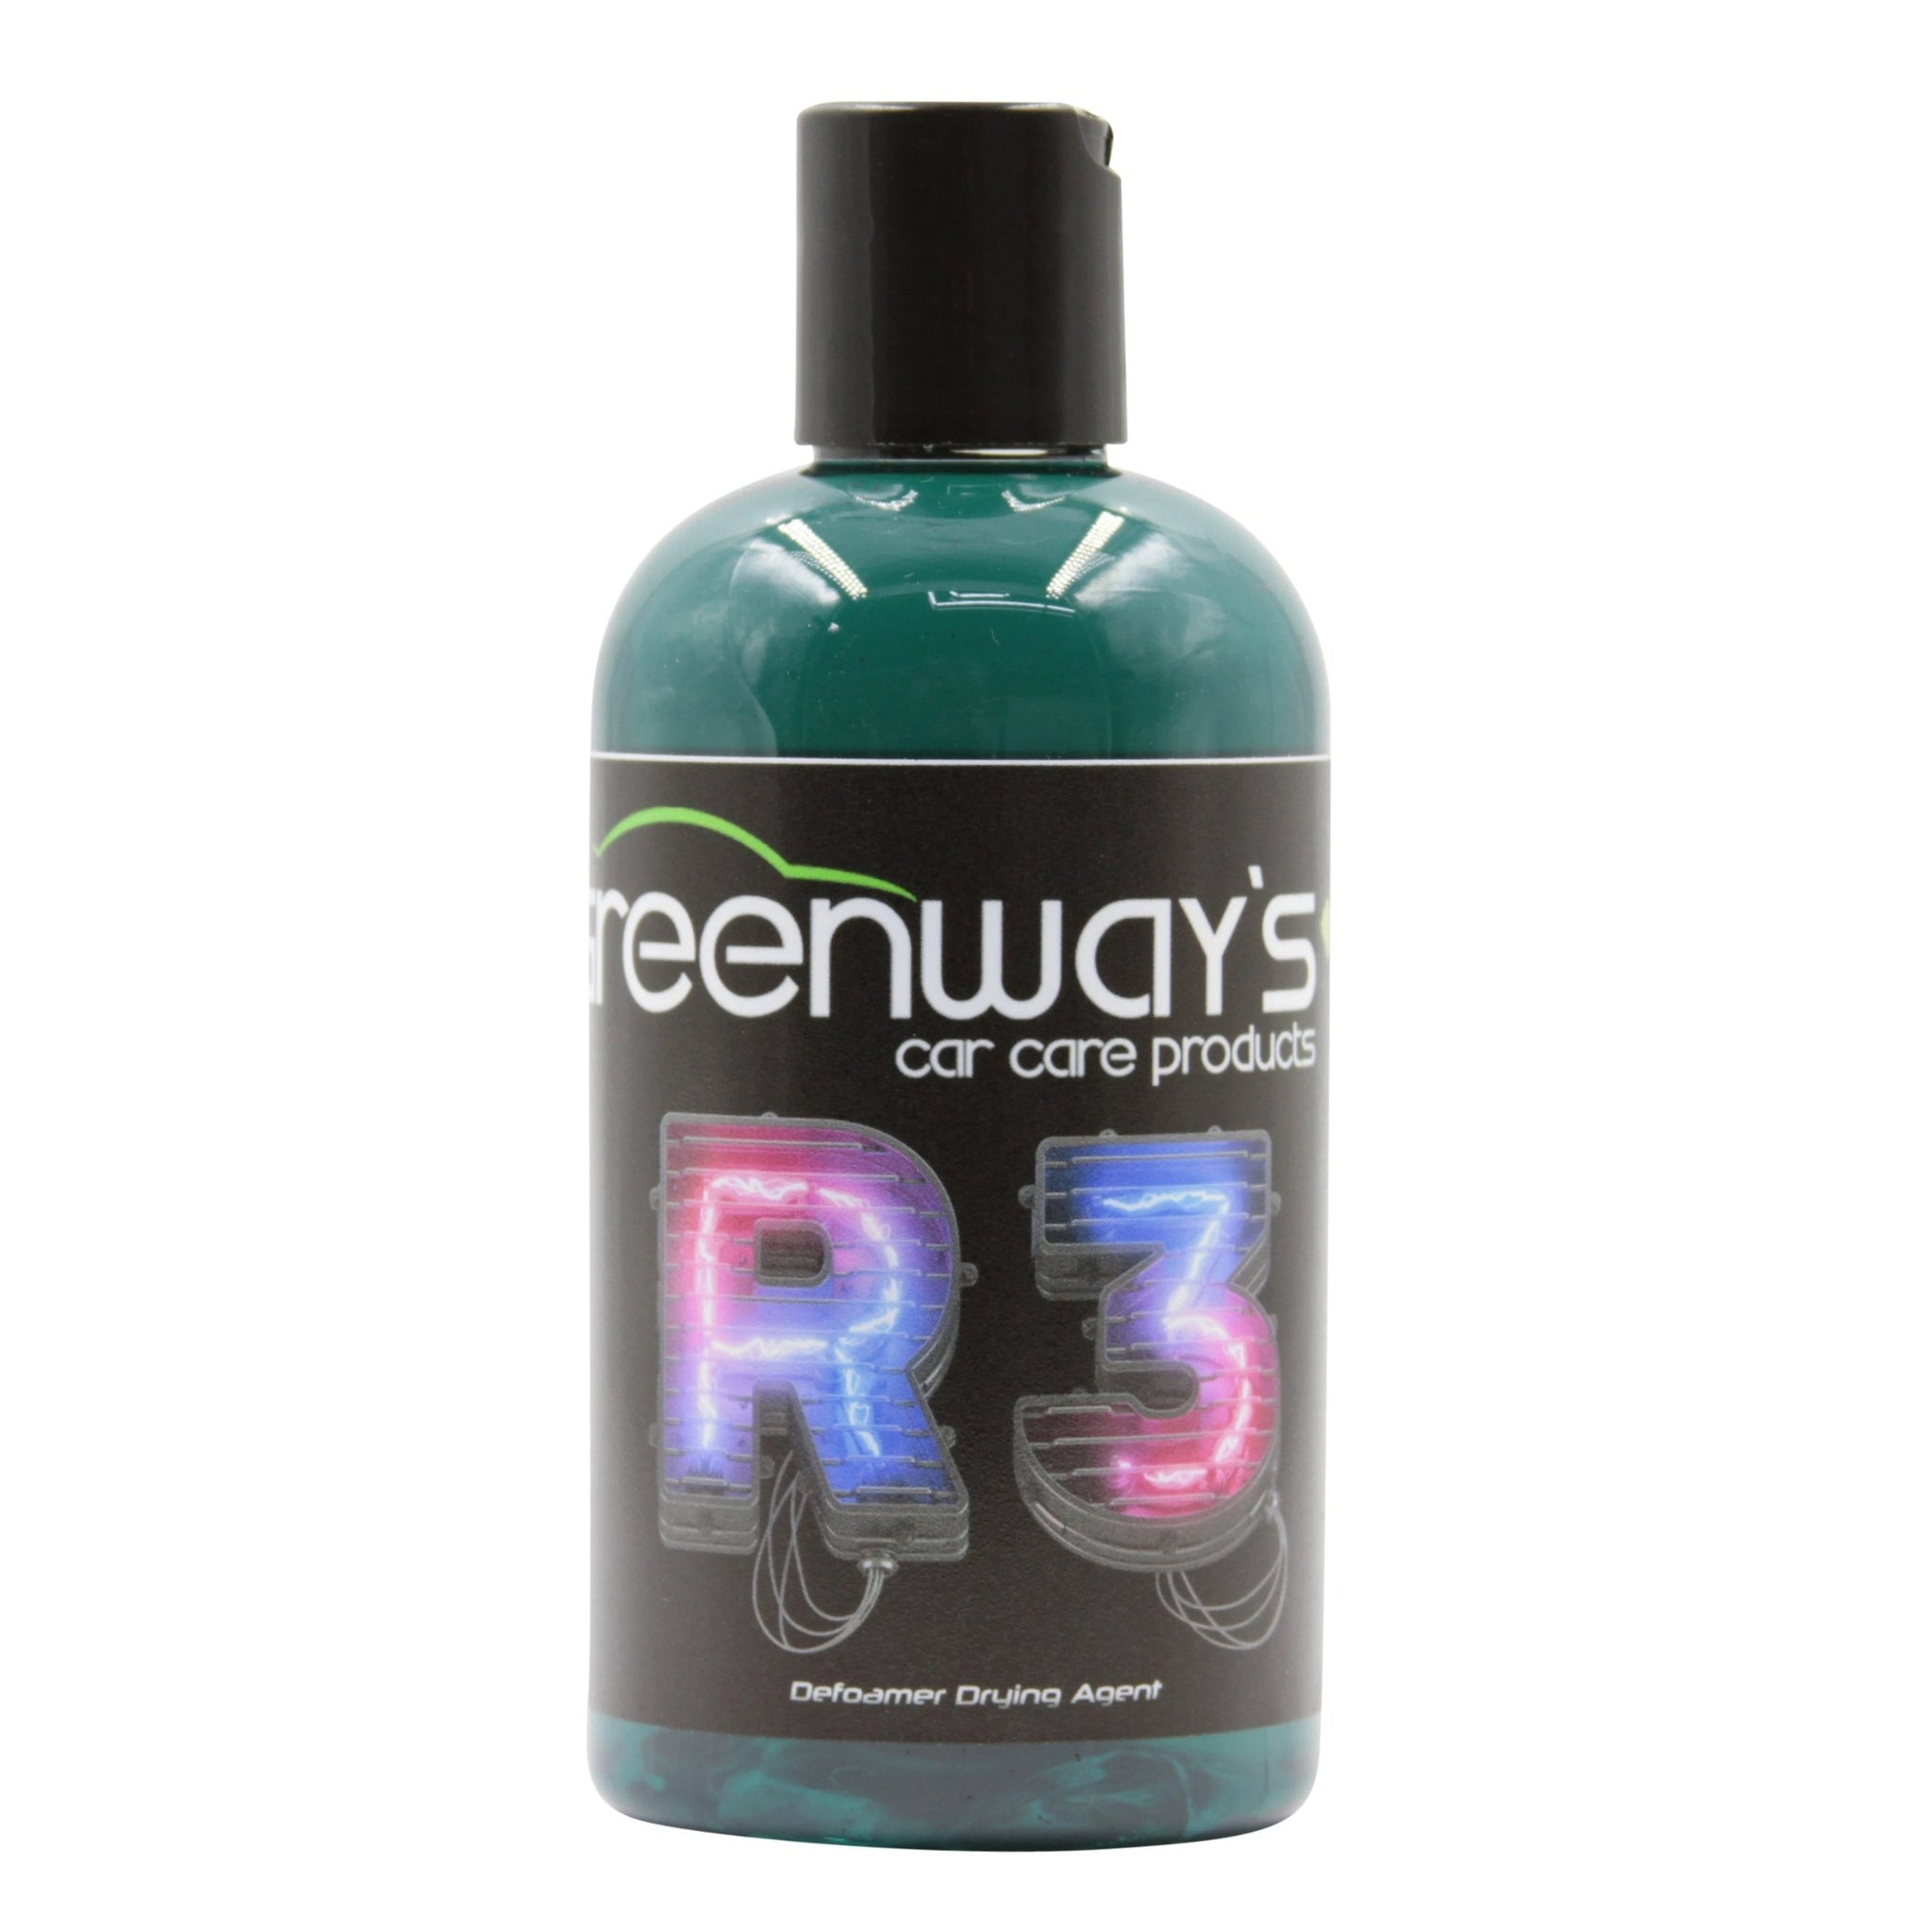 Greenway’s Car Care Products, R3, full-strength vehicle drying foam agent with optic brighteners, custom scented, 8 ounces.